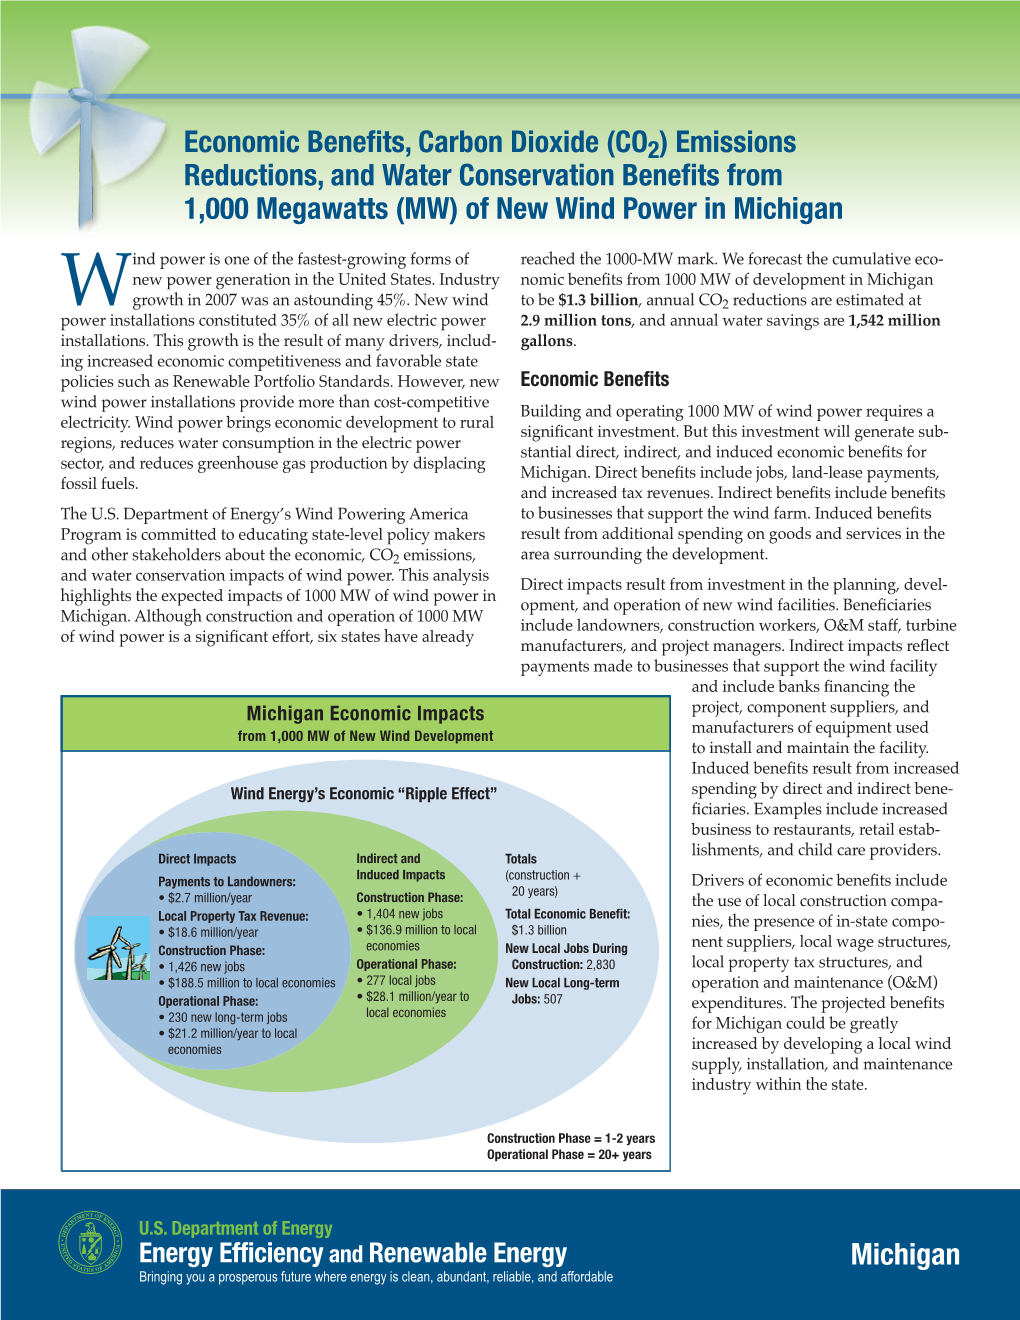 Economic Benefits, Carbon Dioxide (CO2) Emissions Reductions, and Water Conservation Benefits from 1,000 Megawatts (MW) of New Wind Power in Michigan